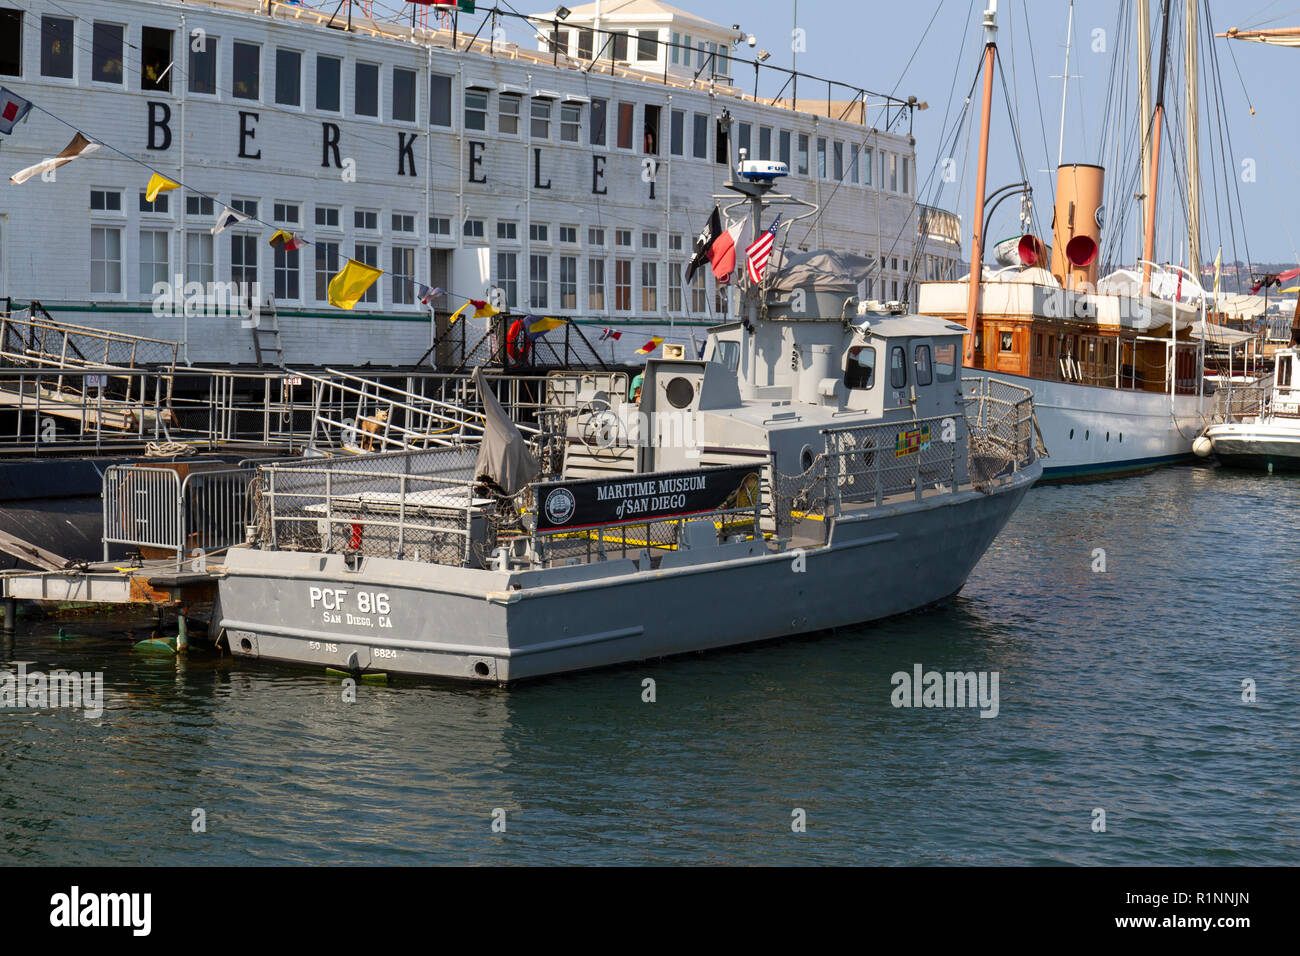 Die PCF816 Swift Boat, Teil der Maritime Museum von San Diego, San Diego, San Diego, California, United States. Stockfoto